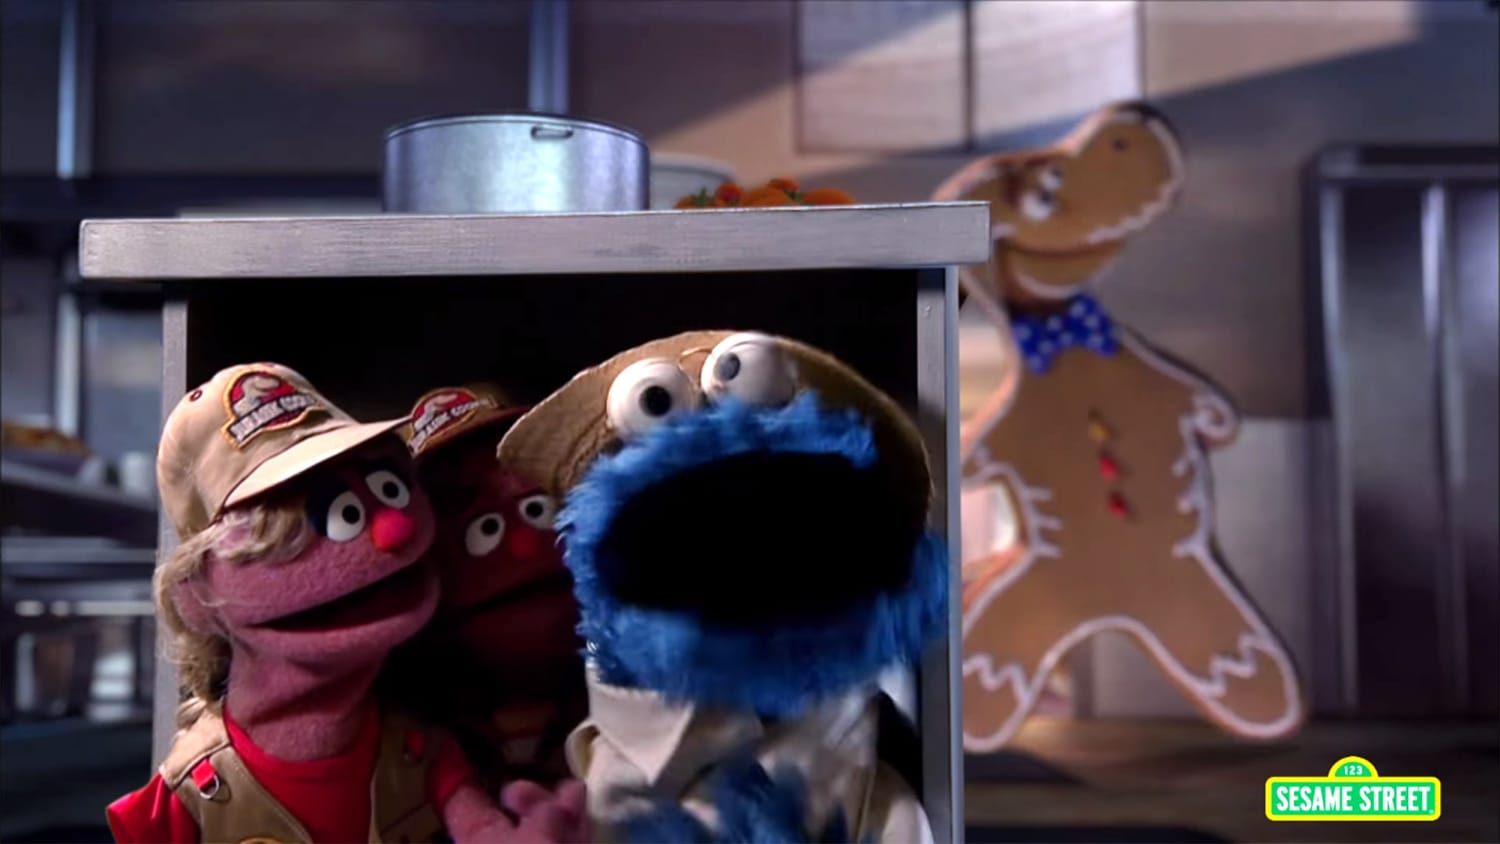 Take this crowdfunded Sesame Street Cookie Monster home. Just hide